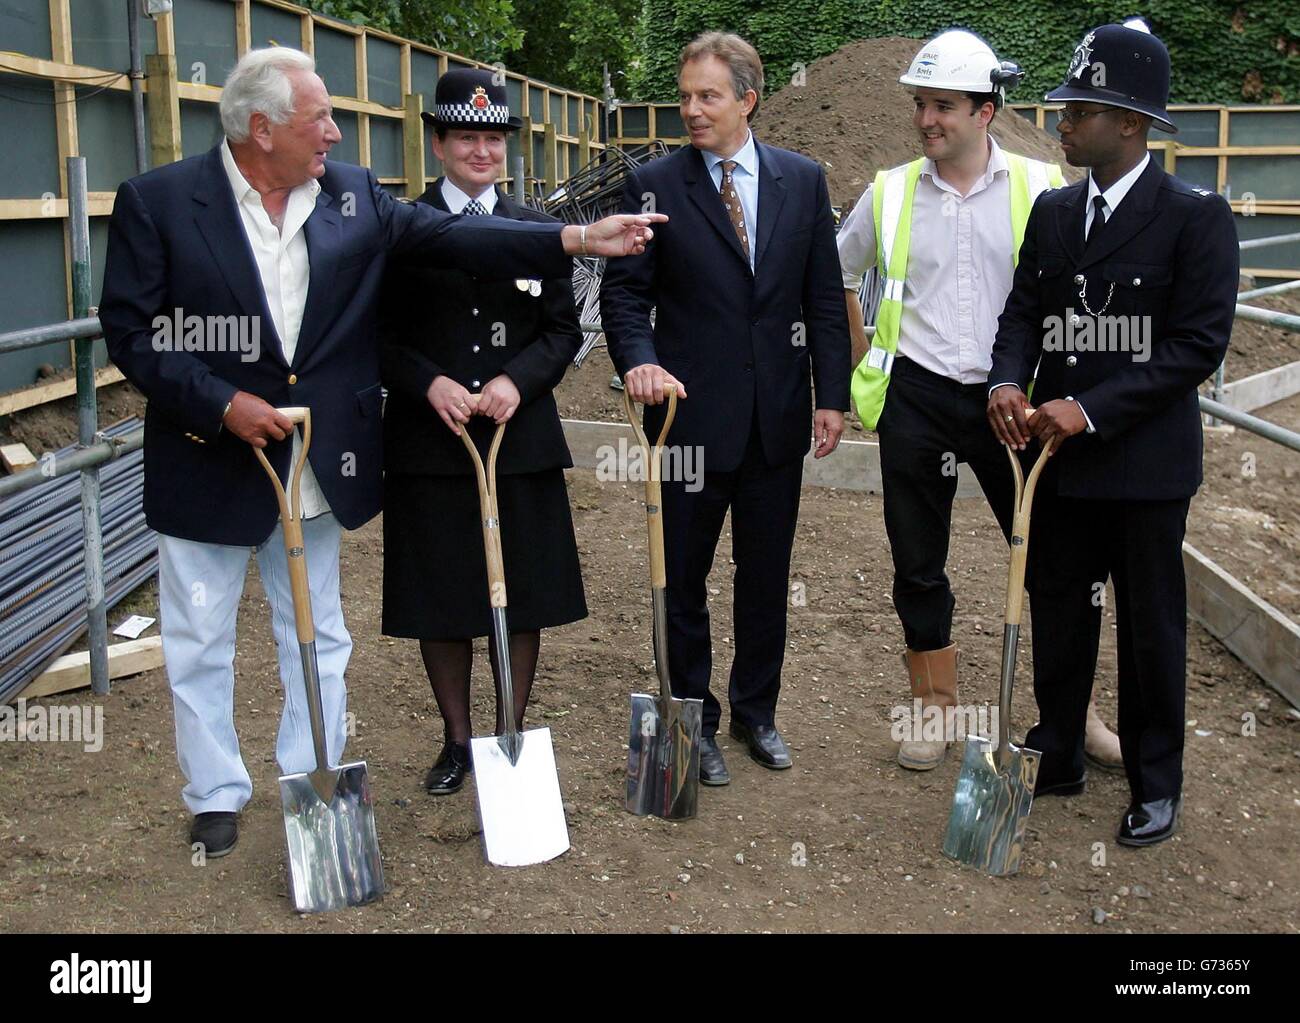 Prime Minister Tony Blair (centre) talks with (left to right) Michael Winner, Greater Manchester Police Constable Lynn Bialowas, Site Manager Bernard Franklin and Metropolitan Police Constable Joel Edwards on a site visit of The National Police Memorial, Whitehall, London. The memorial will be opened in October 2004 to commemorate British police officers who have been killed in the course of duty, and is the brainchild of the Police Memorial Trust founder, Michael Winner. Stock Photo